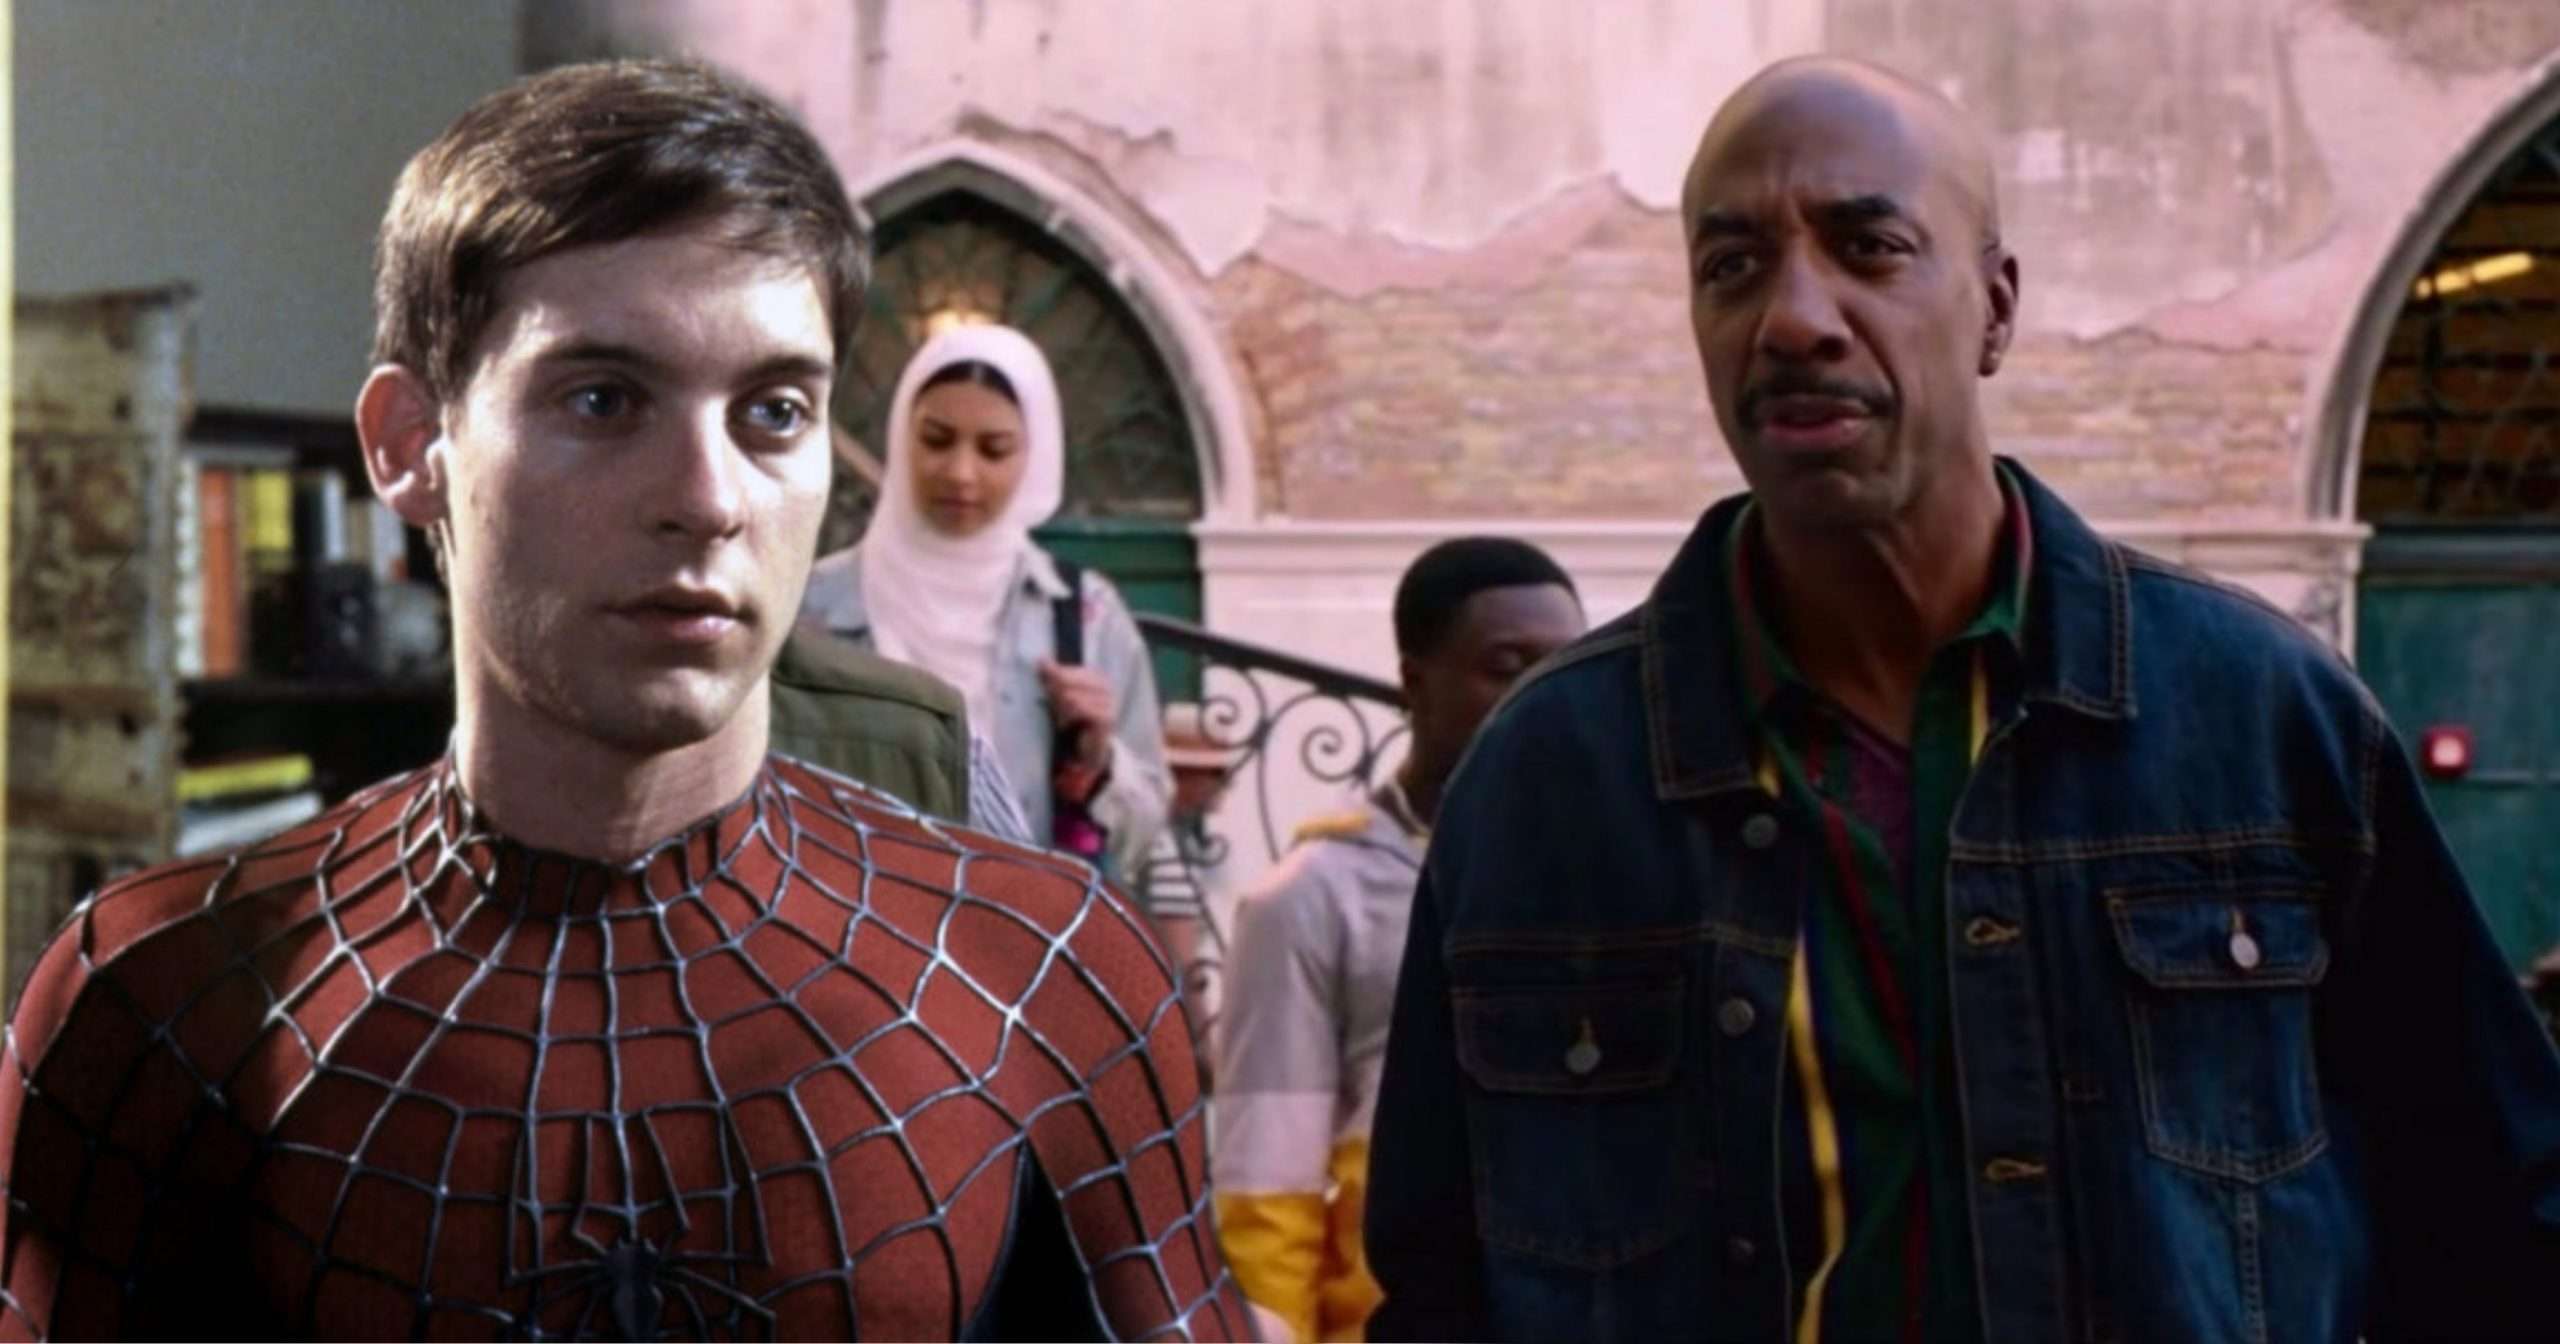 jb-smoove-confirmed-the-appearance-of-tobey-maguire-in-spider-man-no-way-home